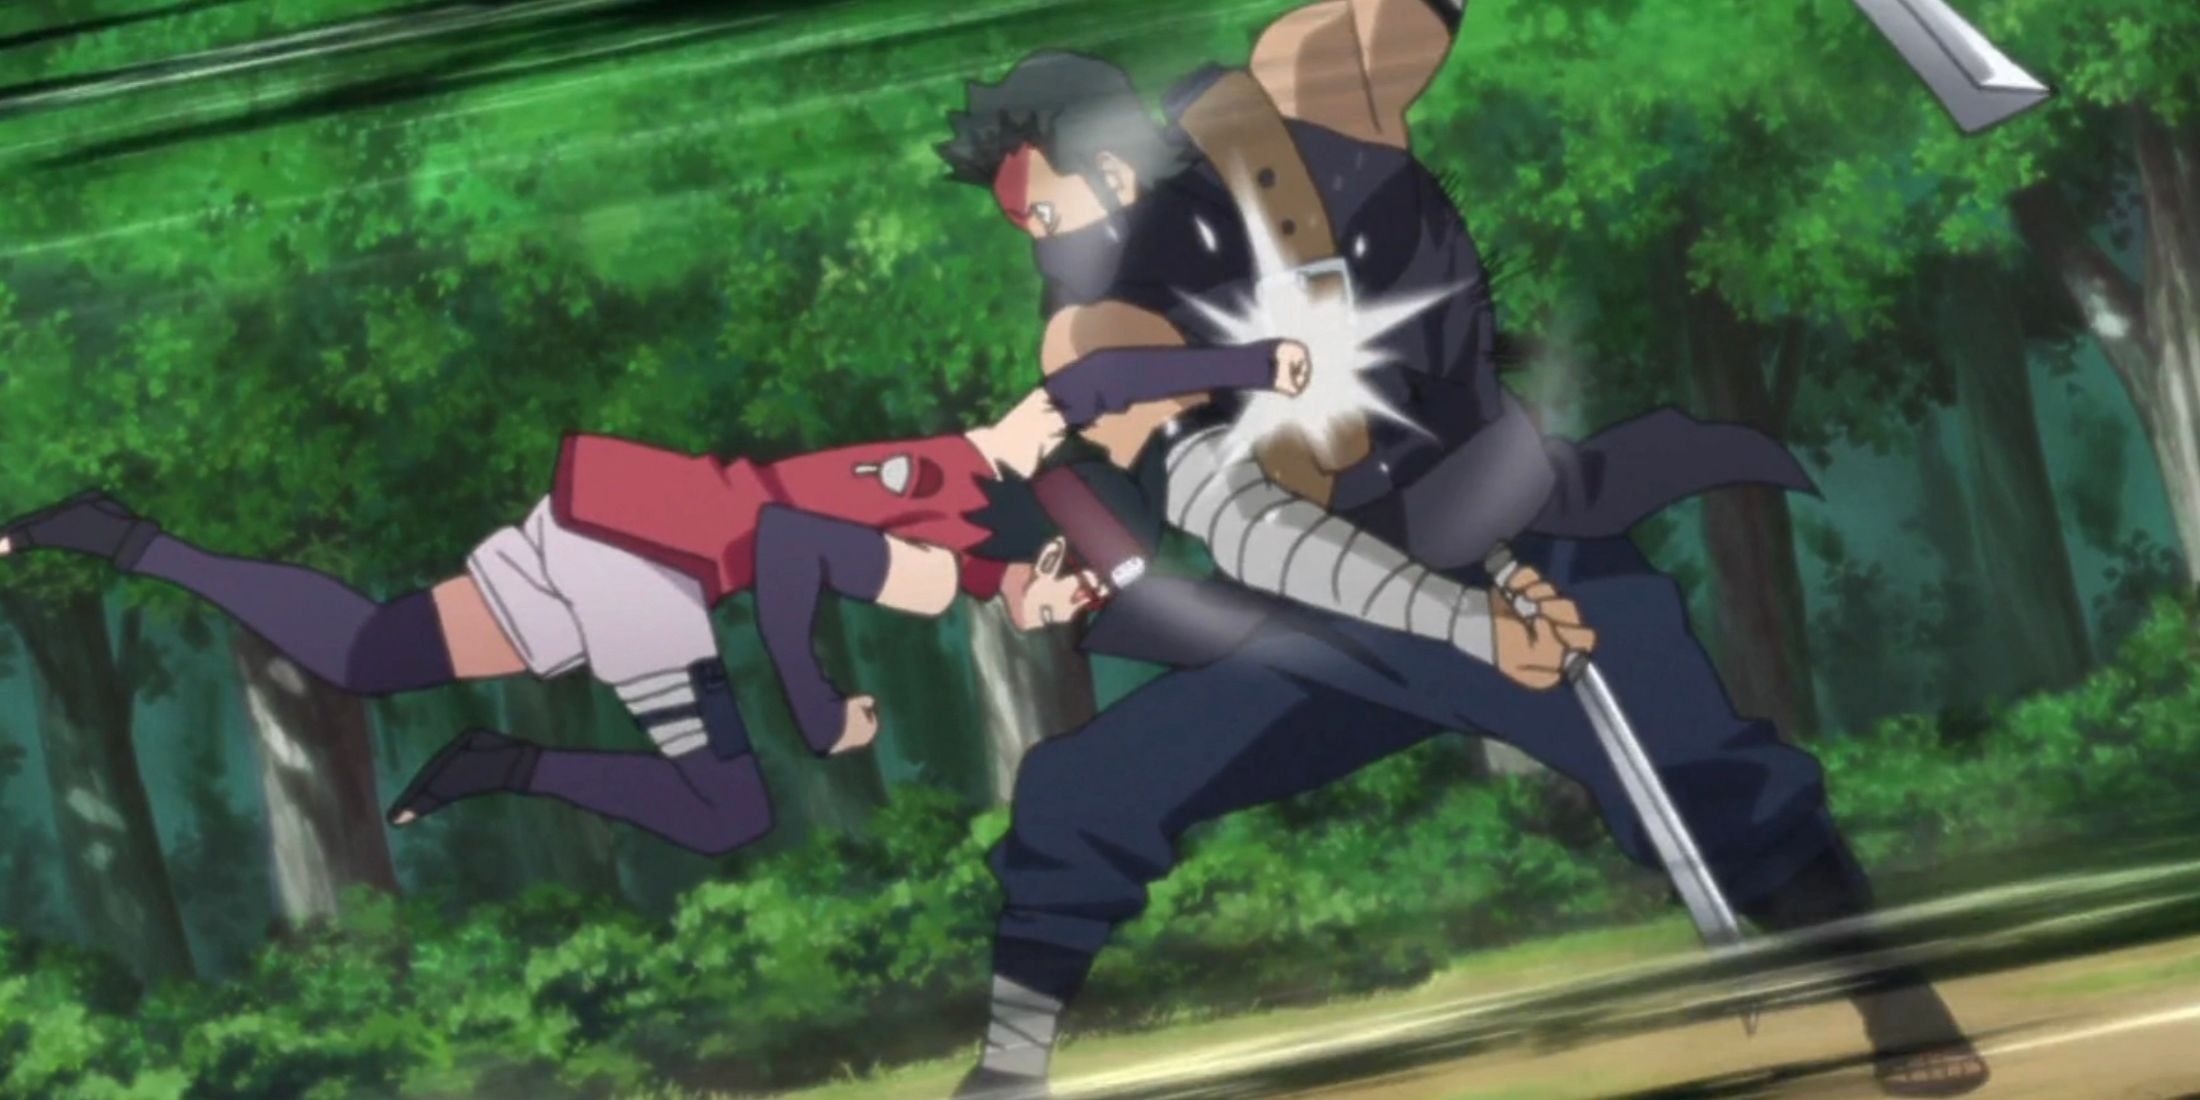 Sarada uses her left hand to punch an opponent in Boruto